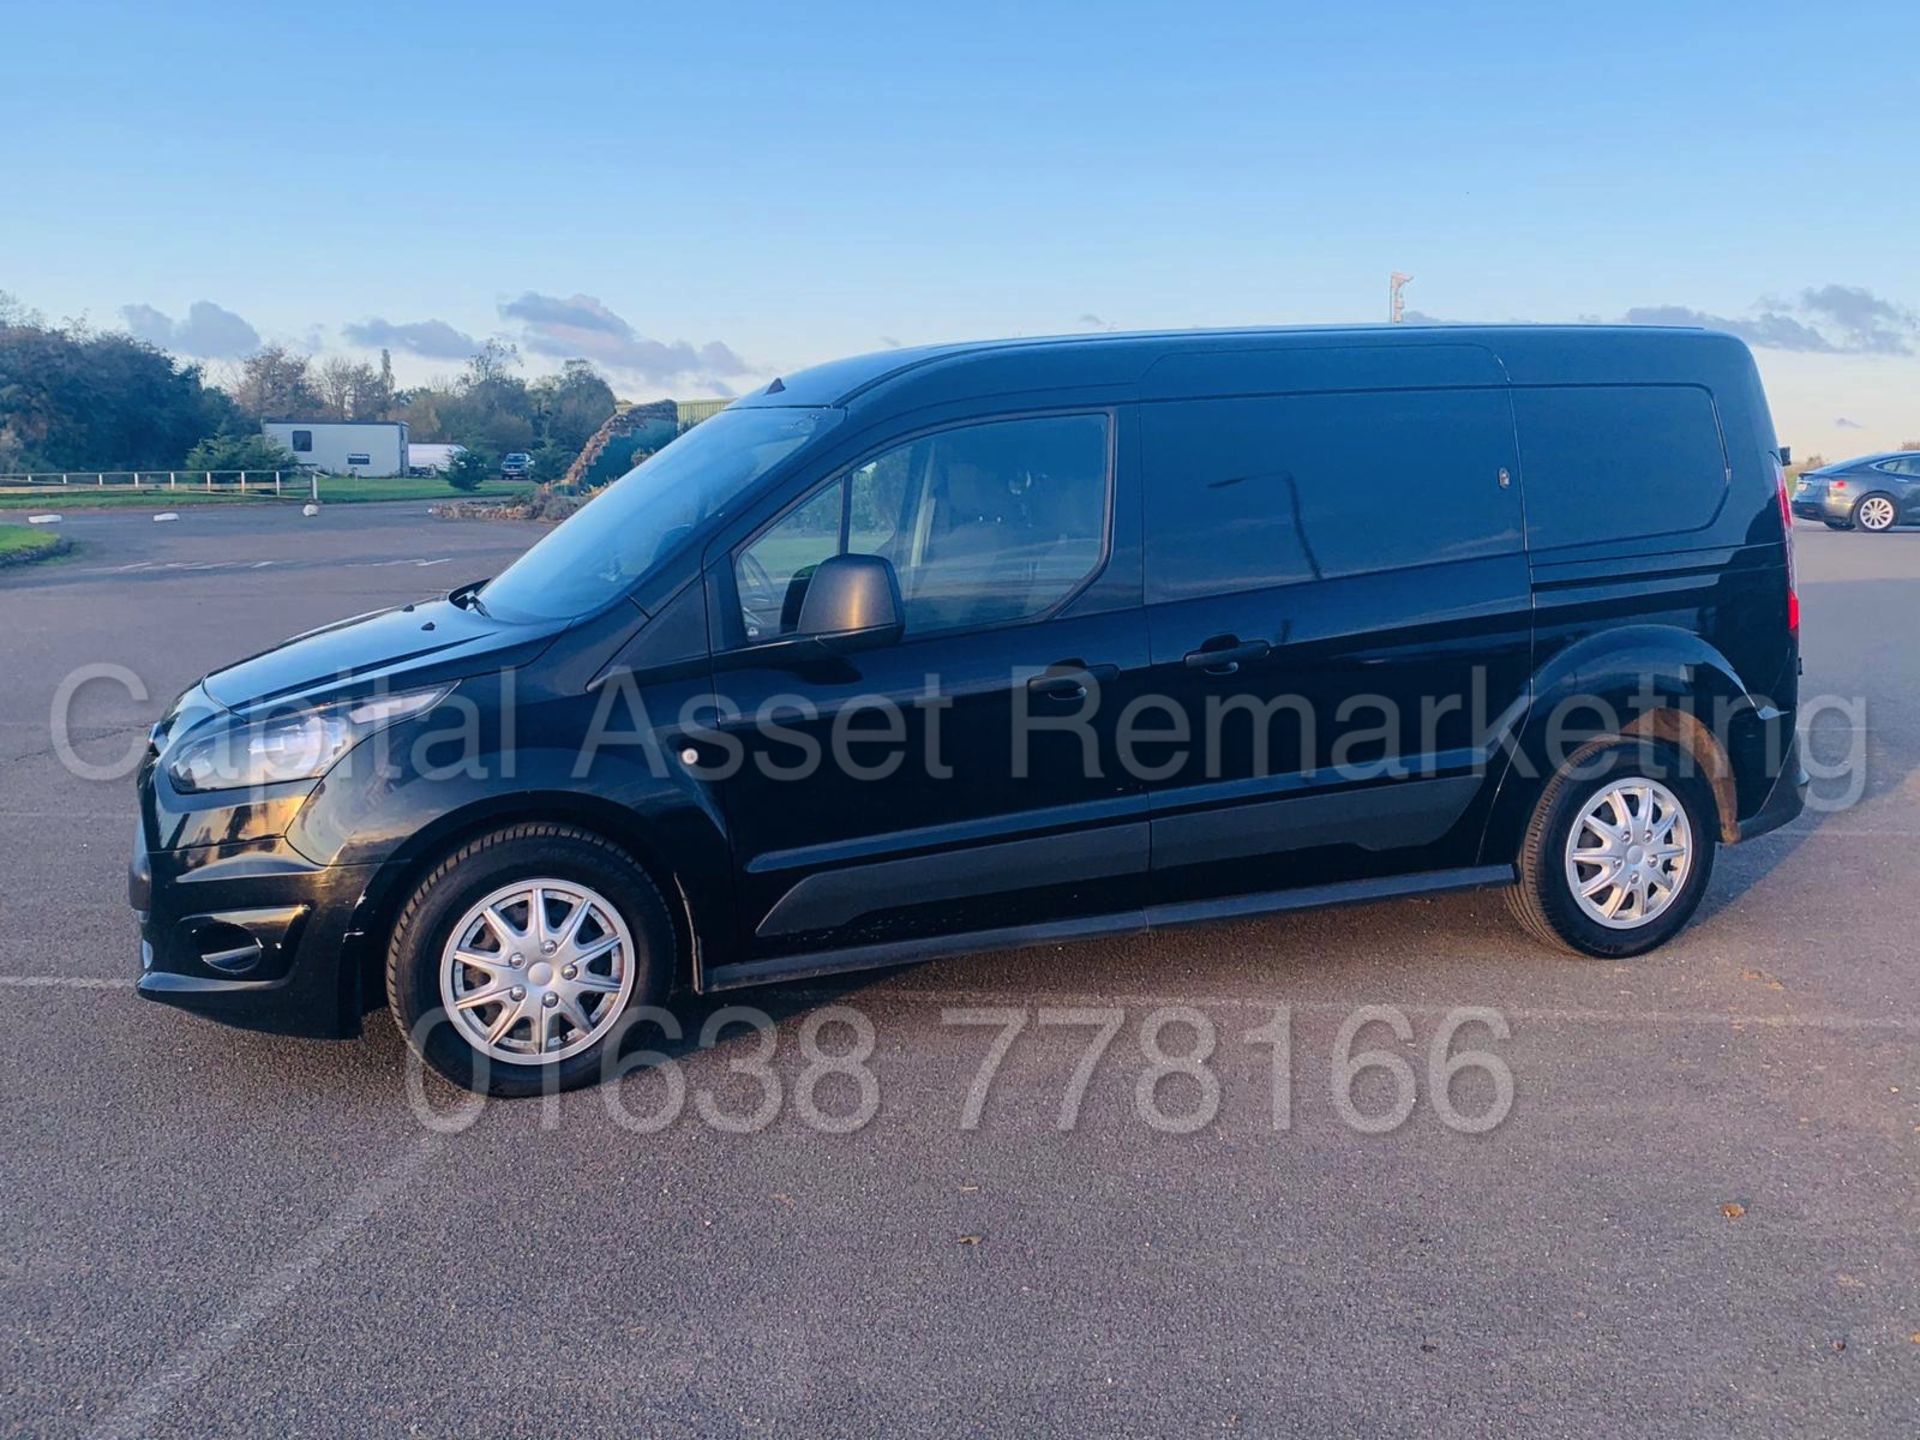 (ON SALE) FORD TRANSIT CONNECT *TREND EDITION* LWB (2016) '1.6 TDCI -95 BHP' **AIR CON** (3 SEATER) - Image 6 of 32